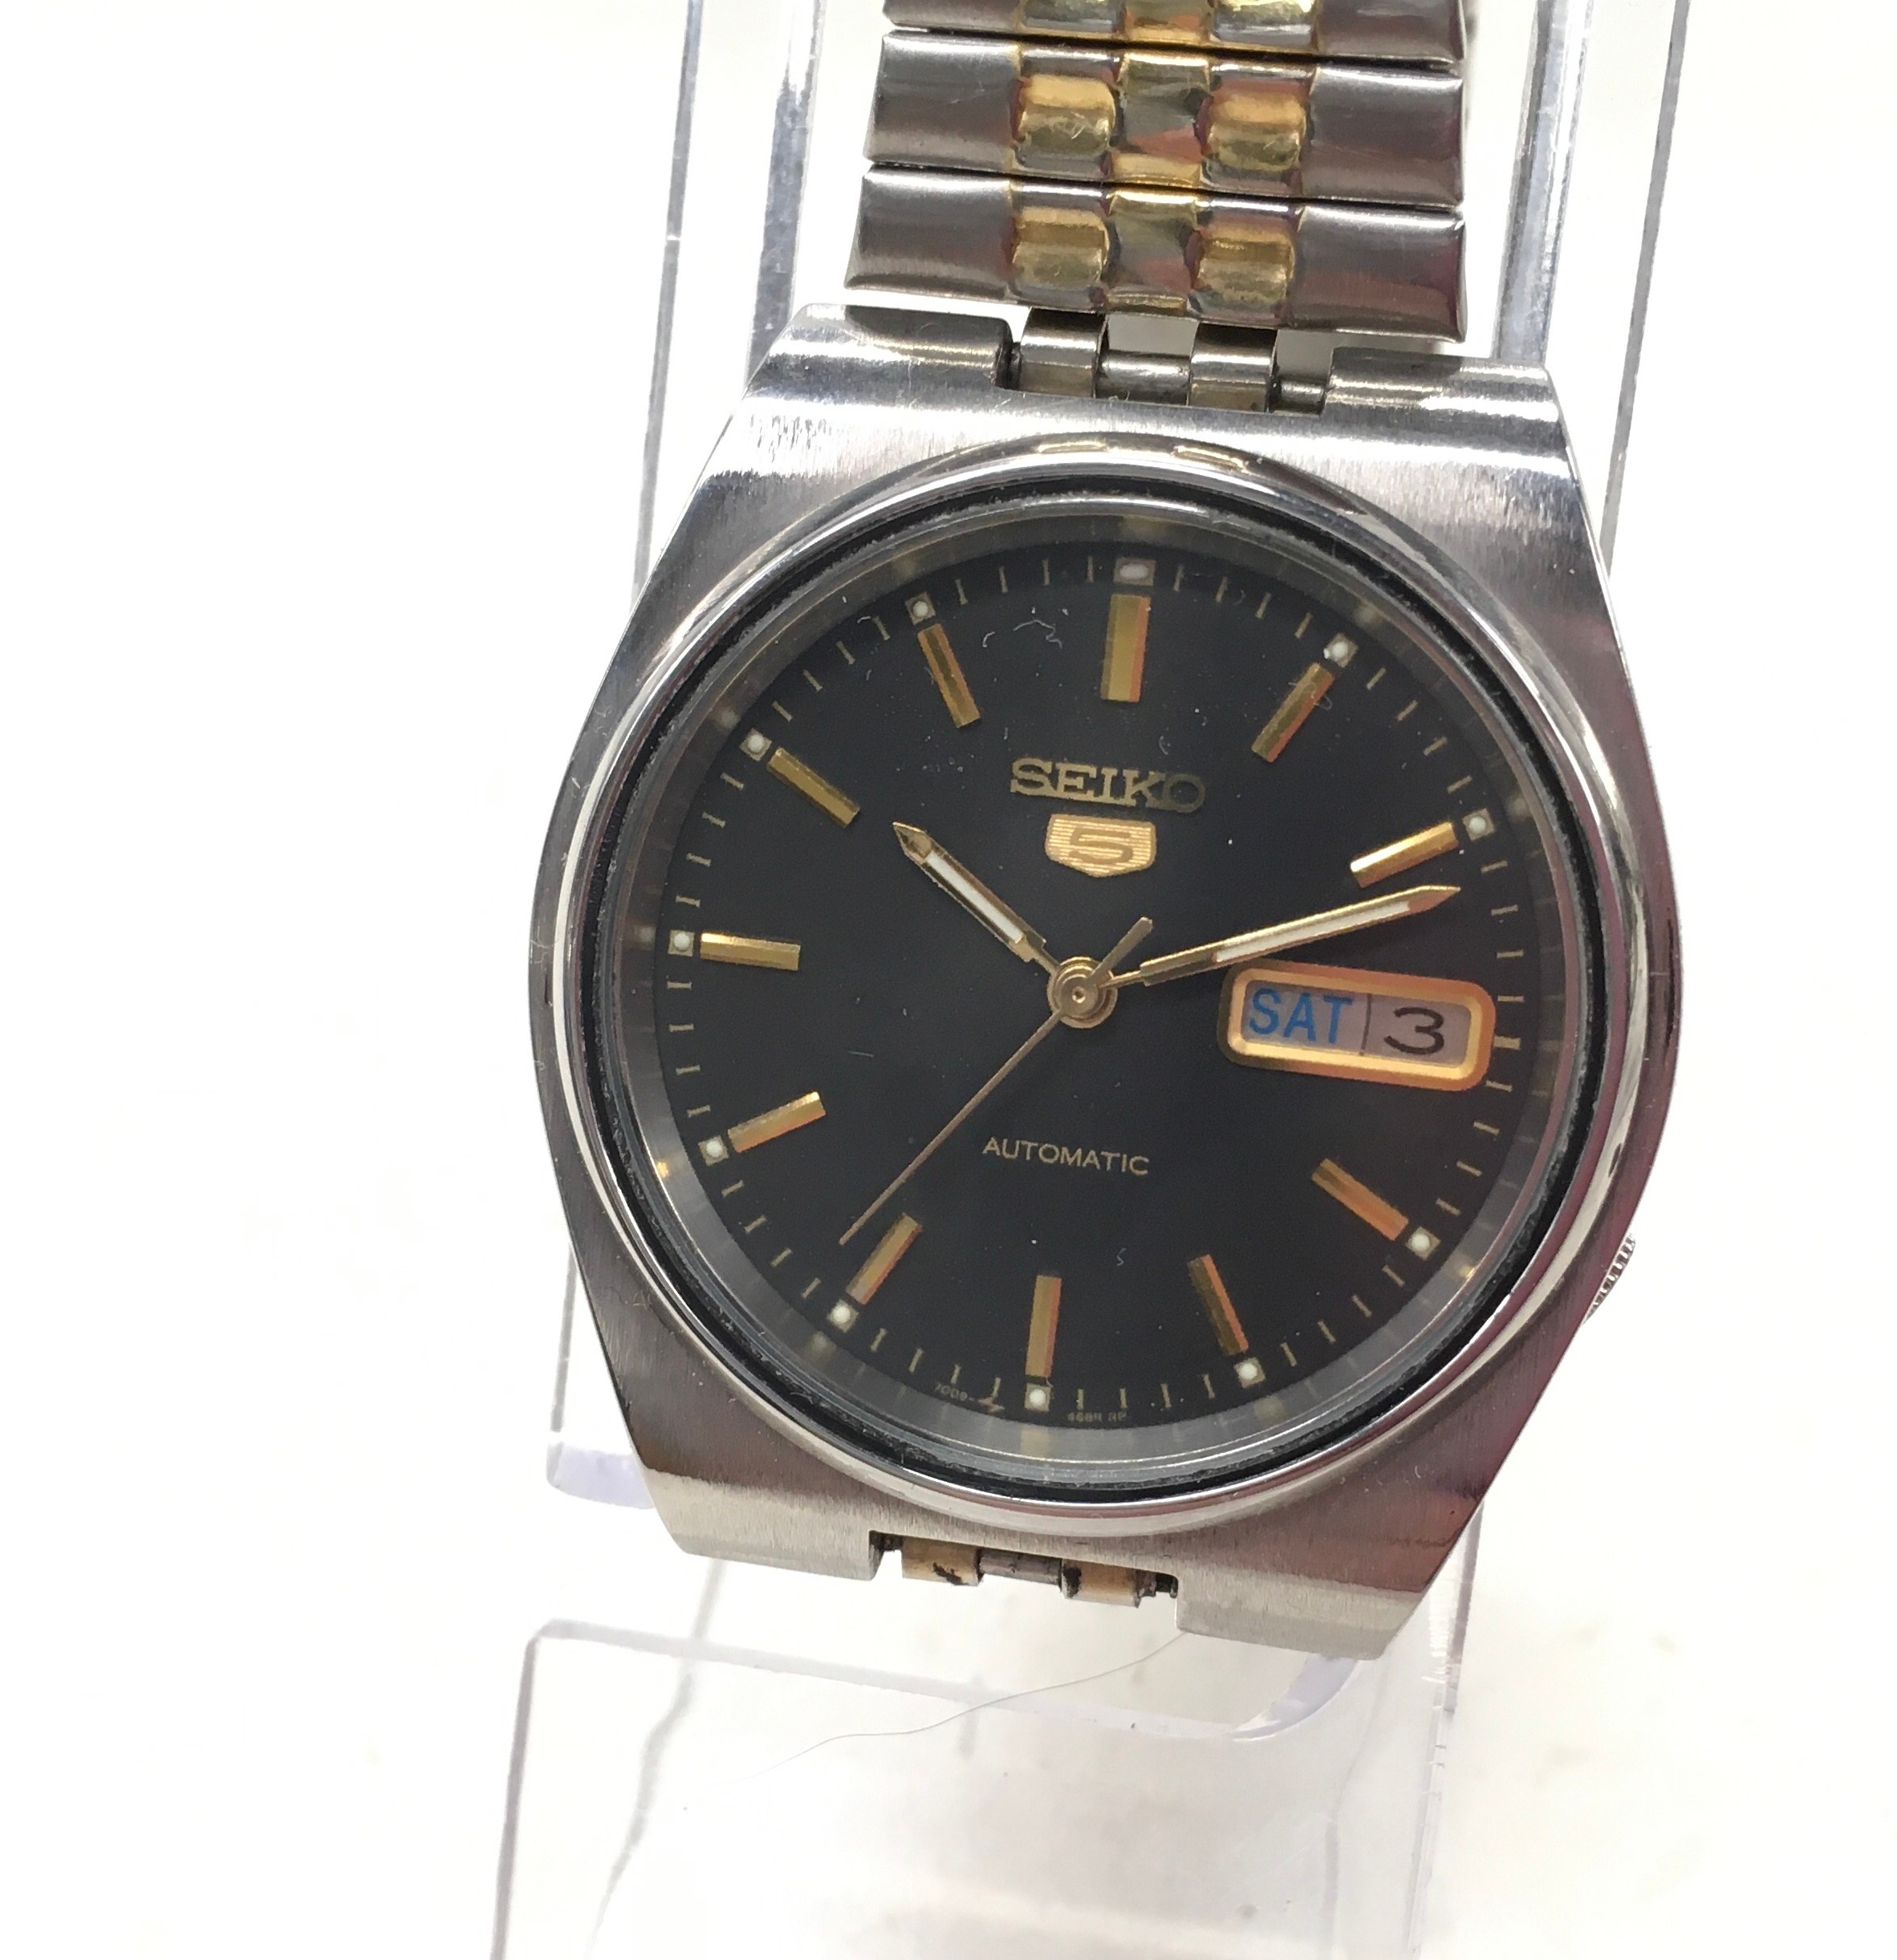 Collection of 4 vintage Seiko '5' gents watches. All seen working. 2 have aftermarket dials. - Image 5 of 7